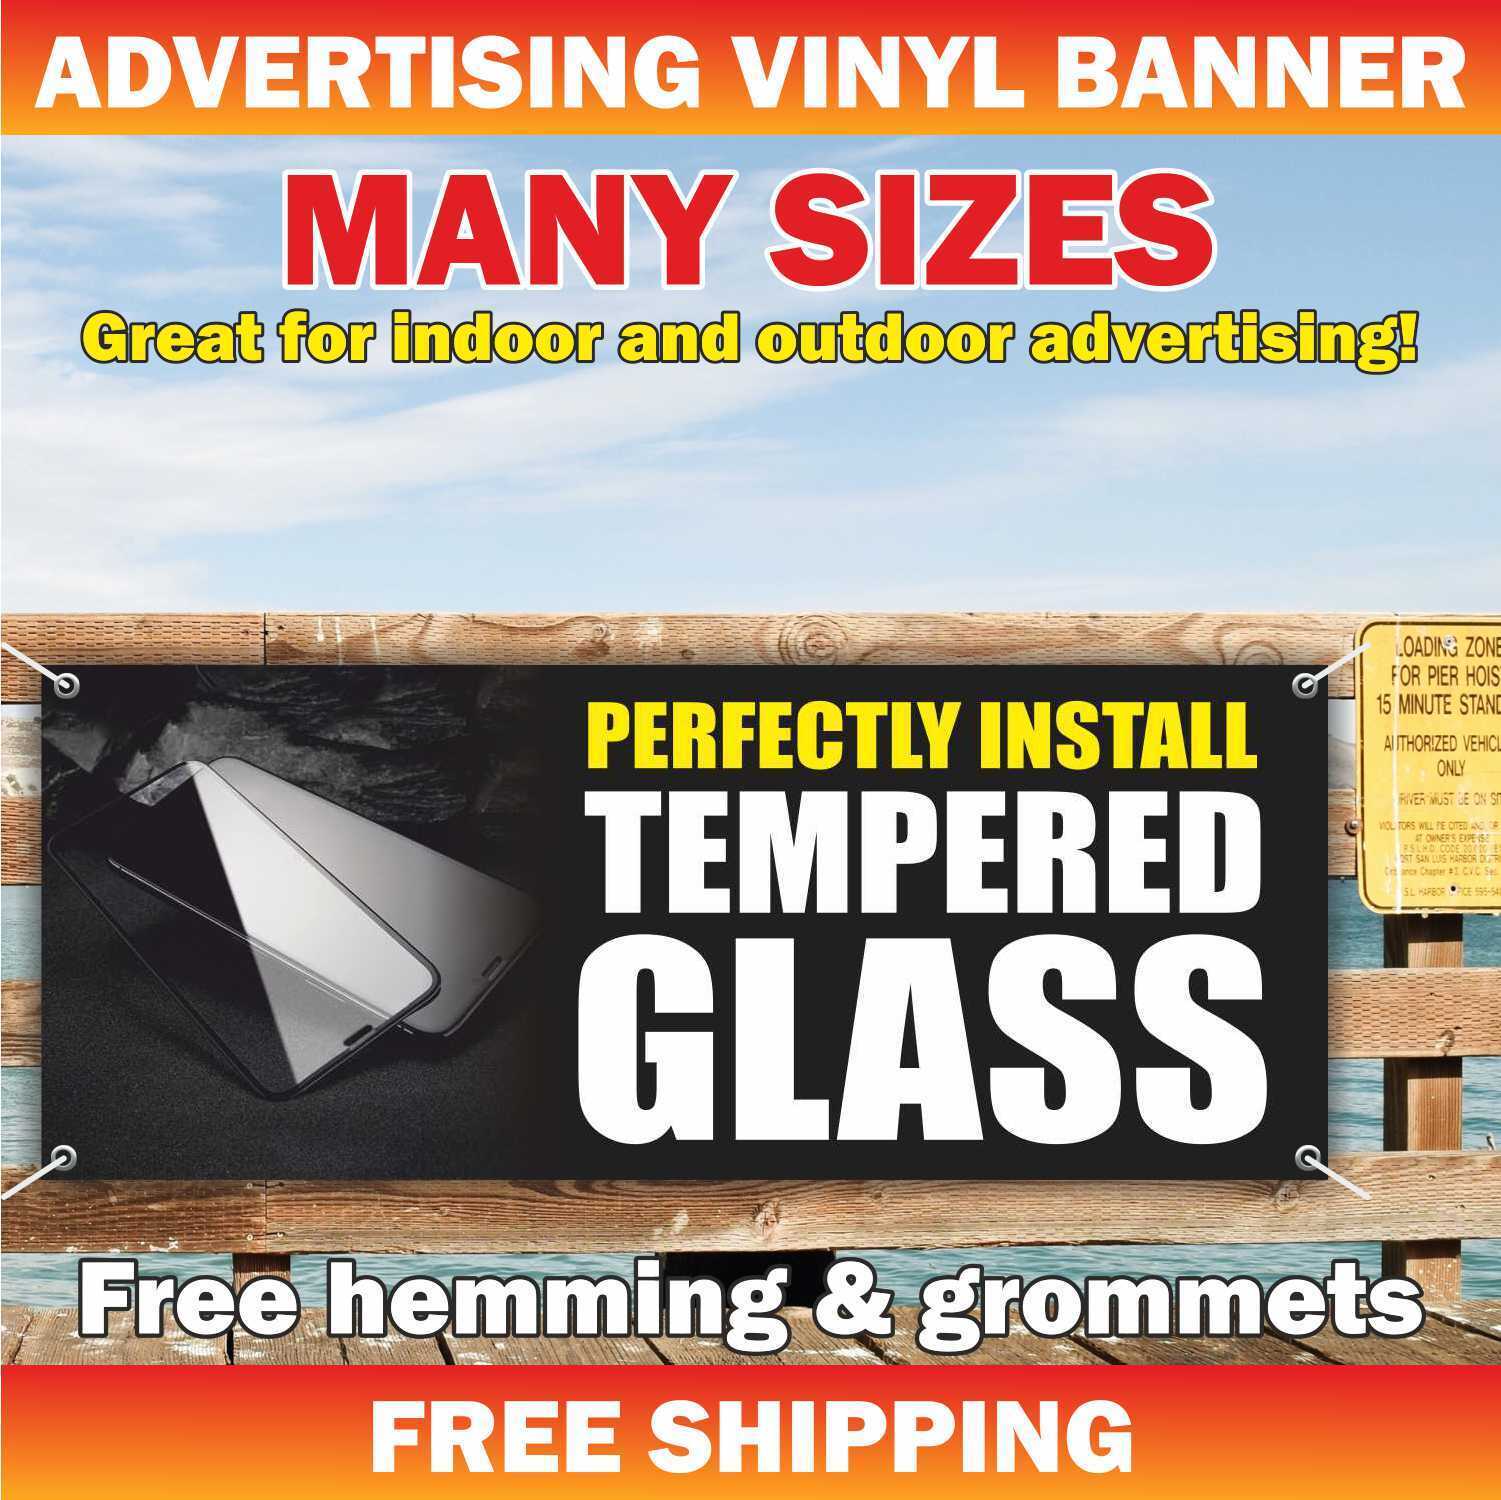 PERFECTLY INSTALL TEMPERED GLASS Advertising Banner Vinyl Mesh Sign service fix